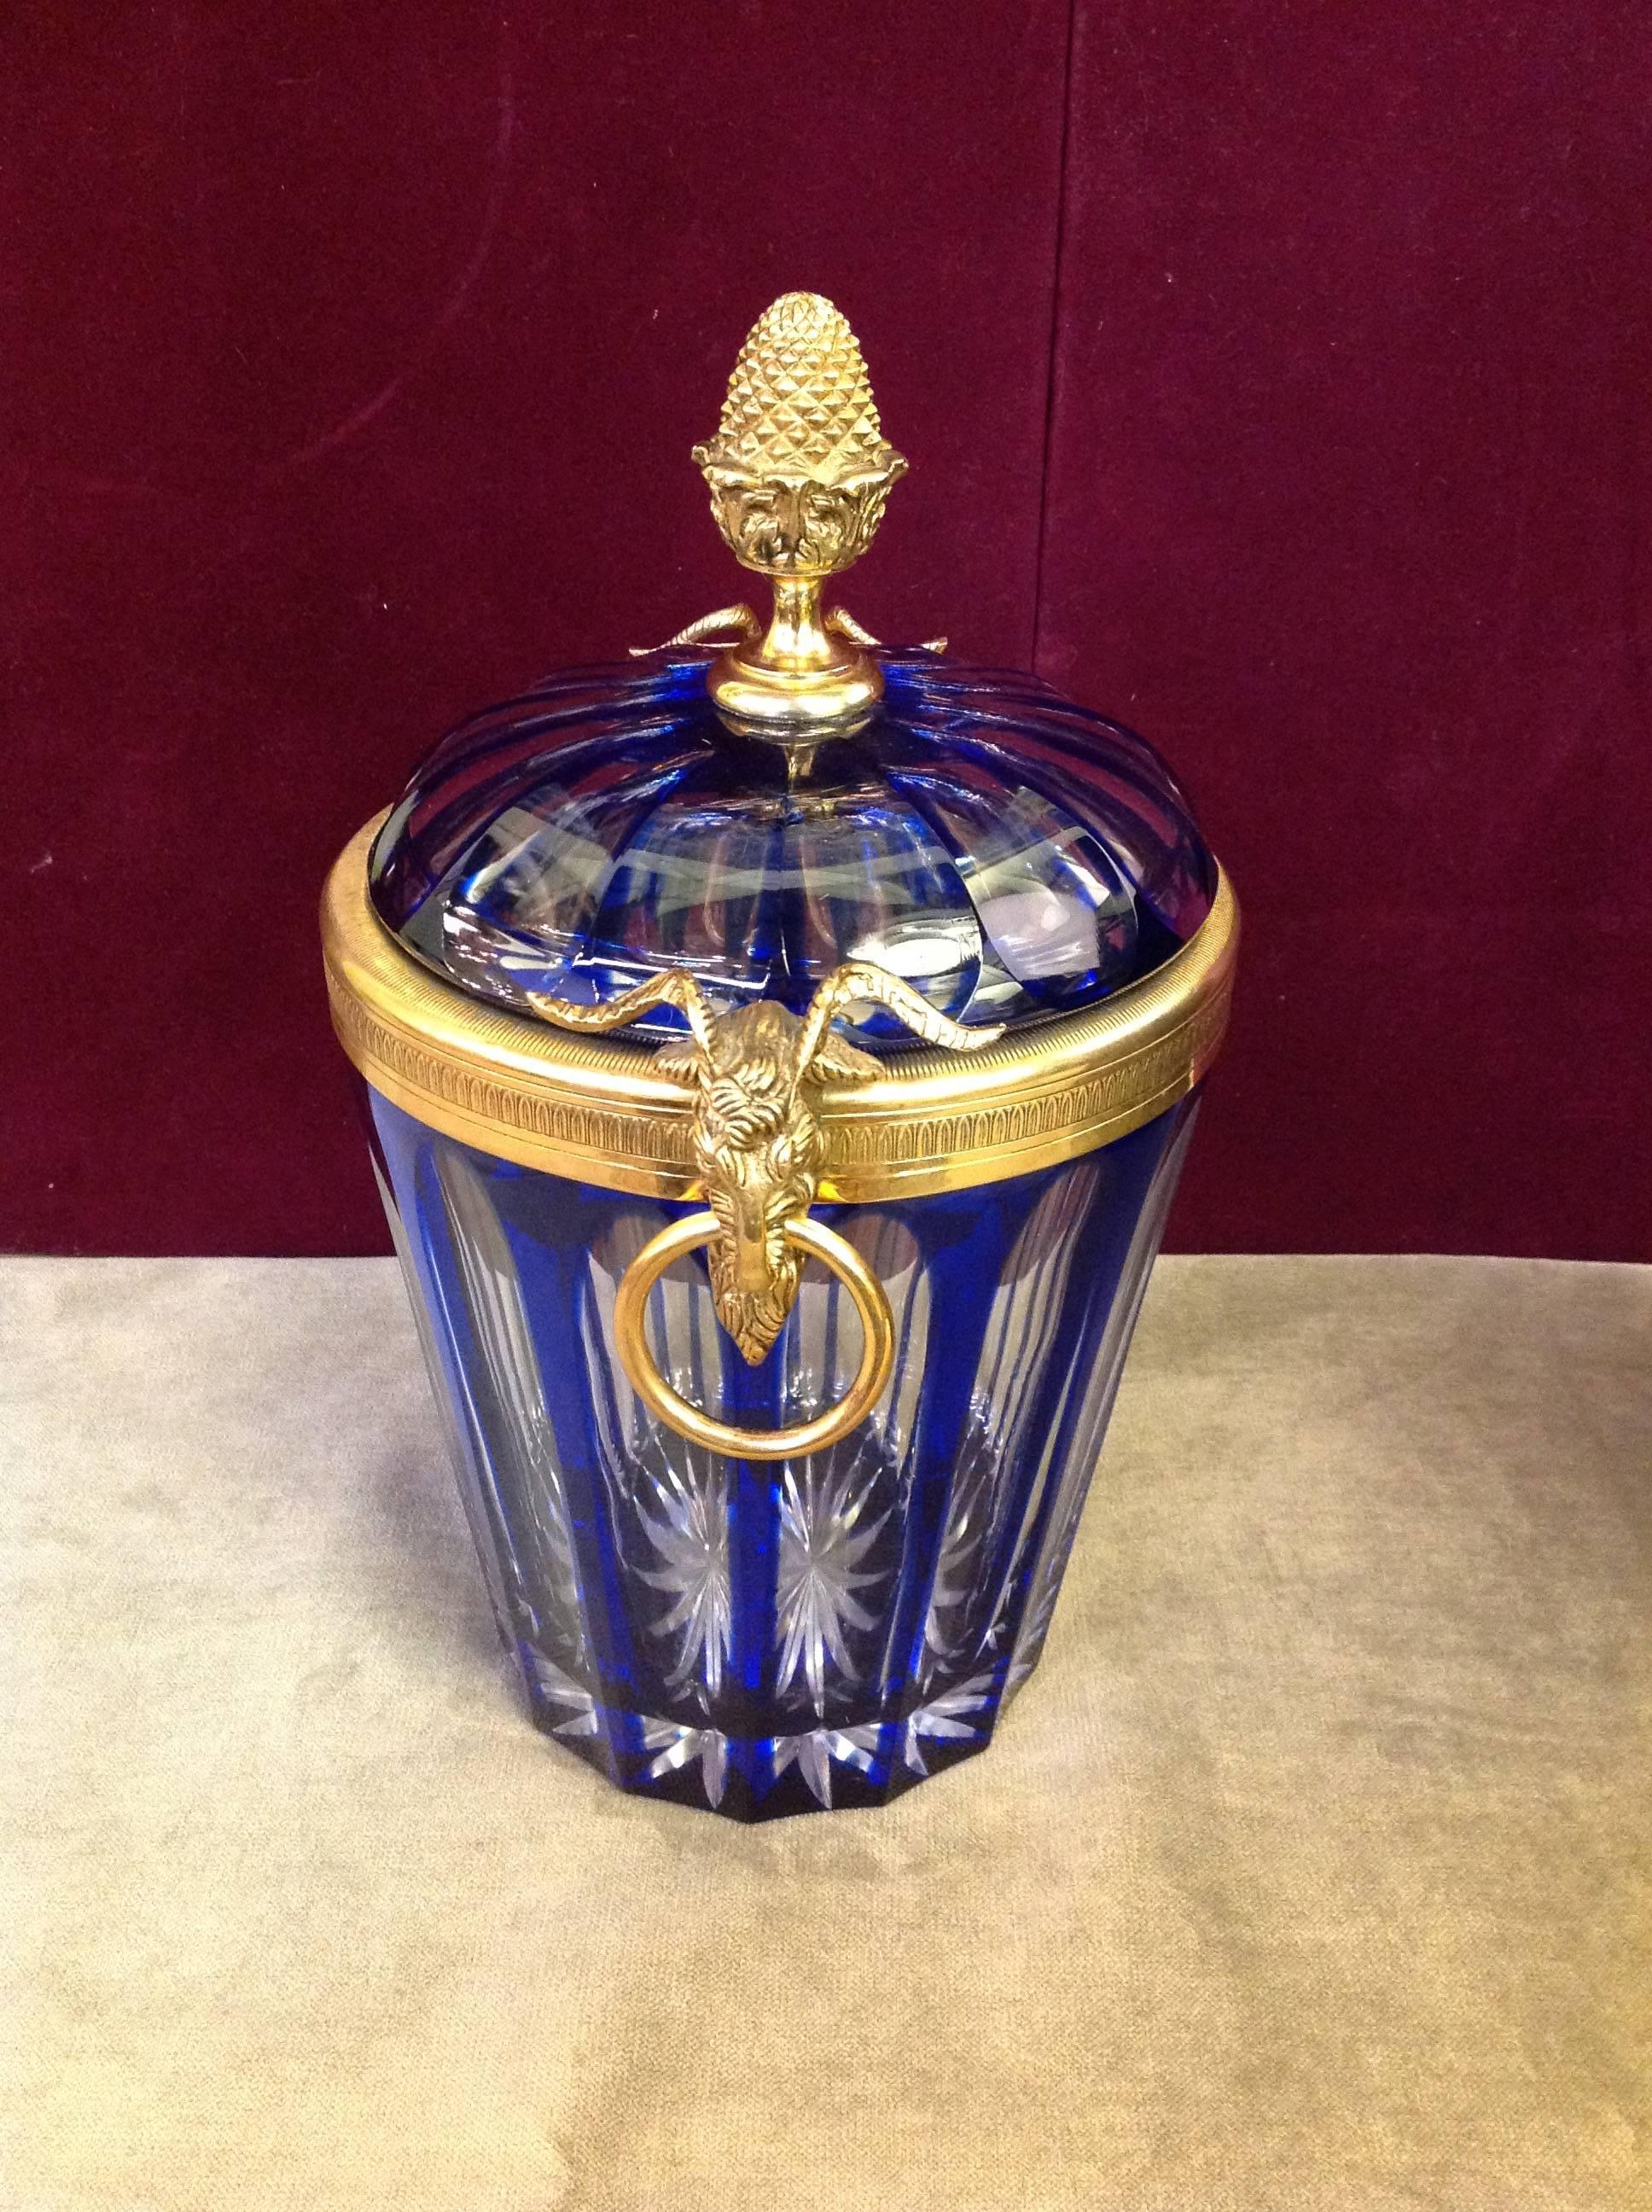 Lovely cobalt French cobalt and clear lead crystal covered bucket with gilt bronze ormolu ram's handle and finial signed by Martin Benito.